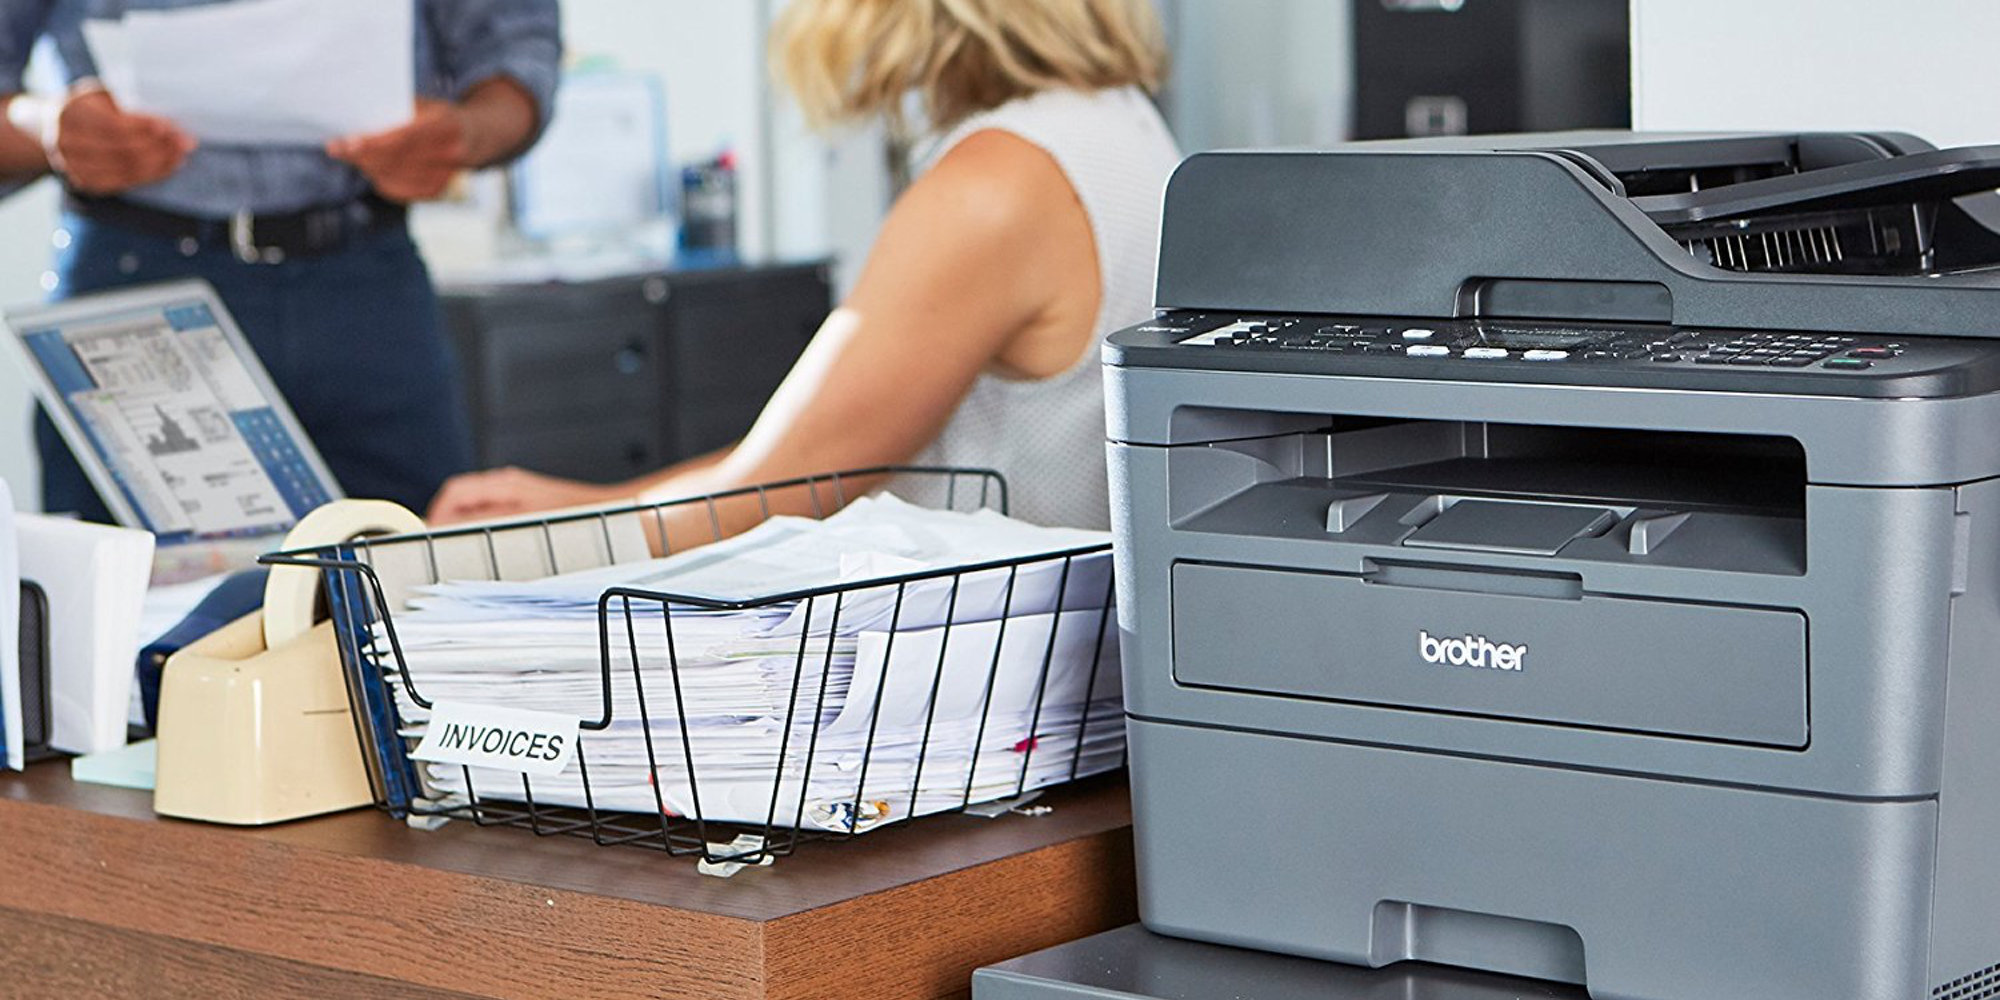 Amazon offers AirPrint-compatible AiO Laser Printer for $100 shipped (Reg. $130+)